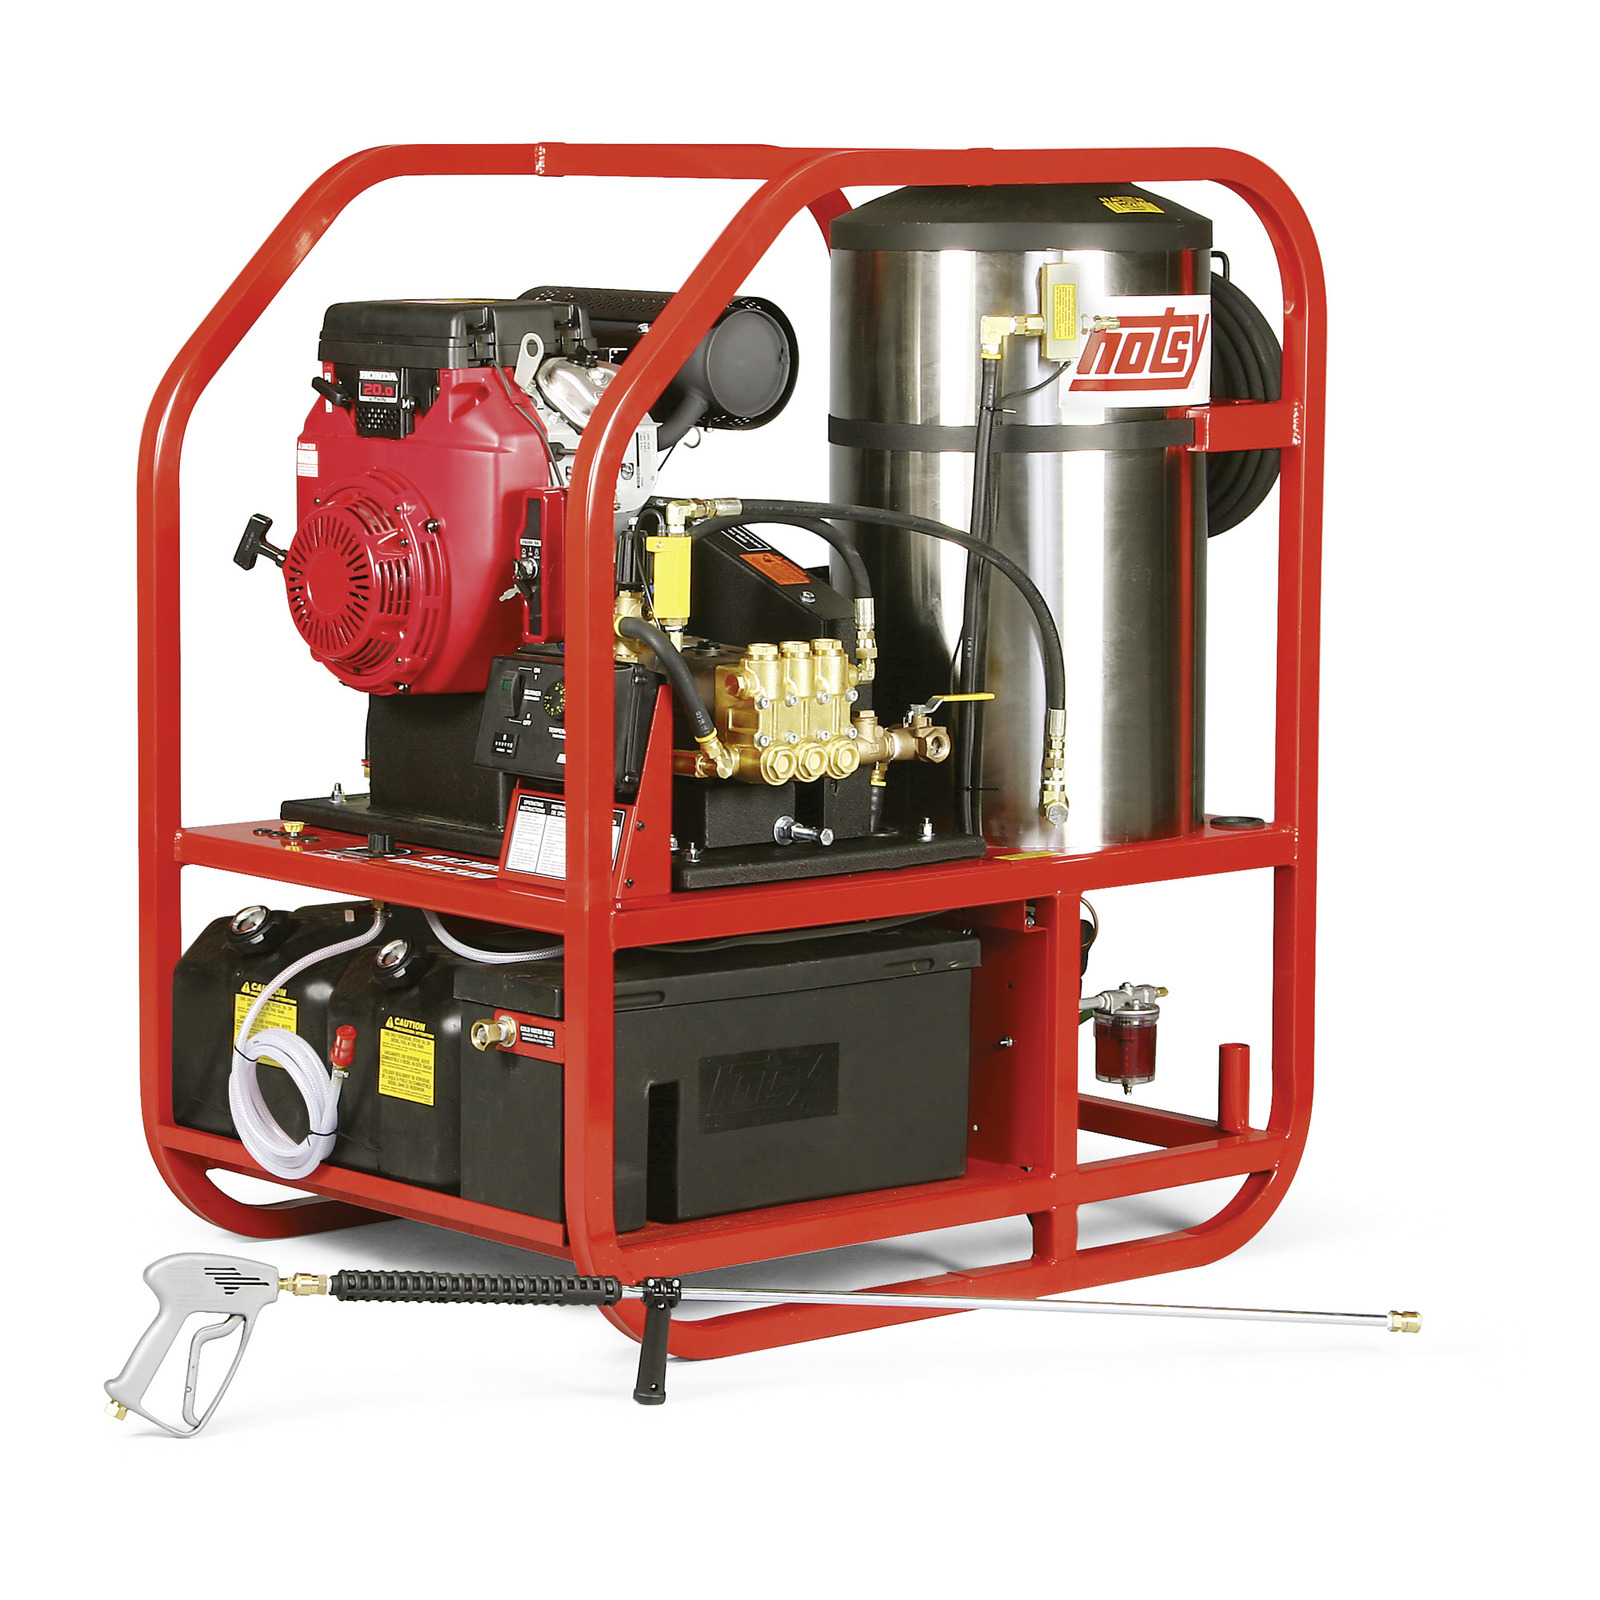 Hotsy 1200 Series – Stationary Gas/Diesel Hot Water Pressure Washers